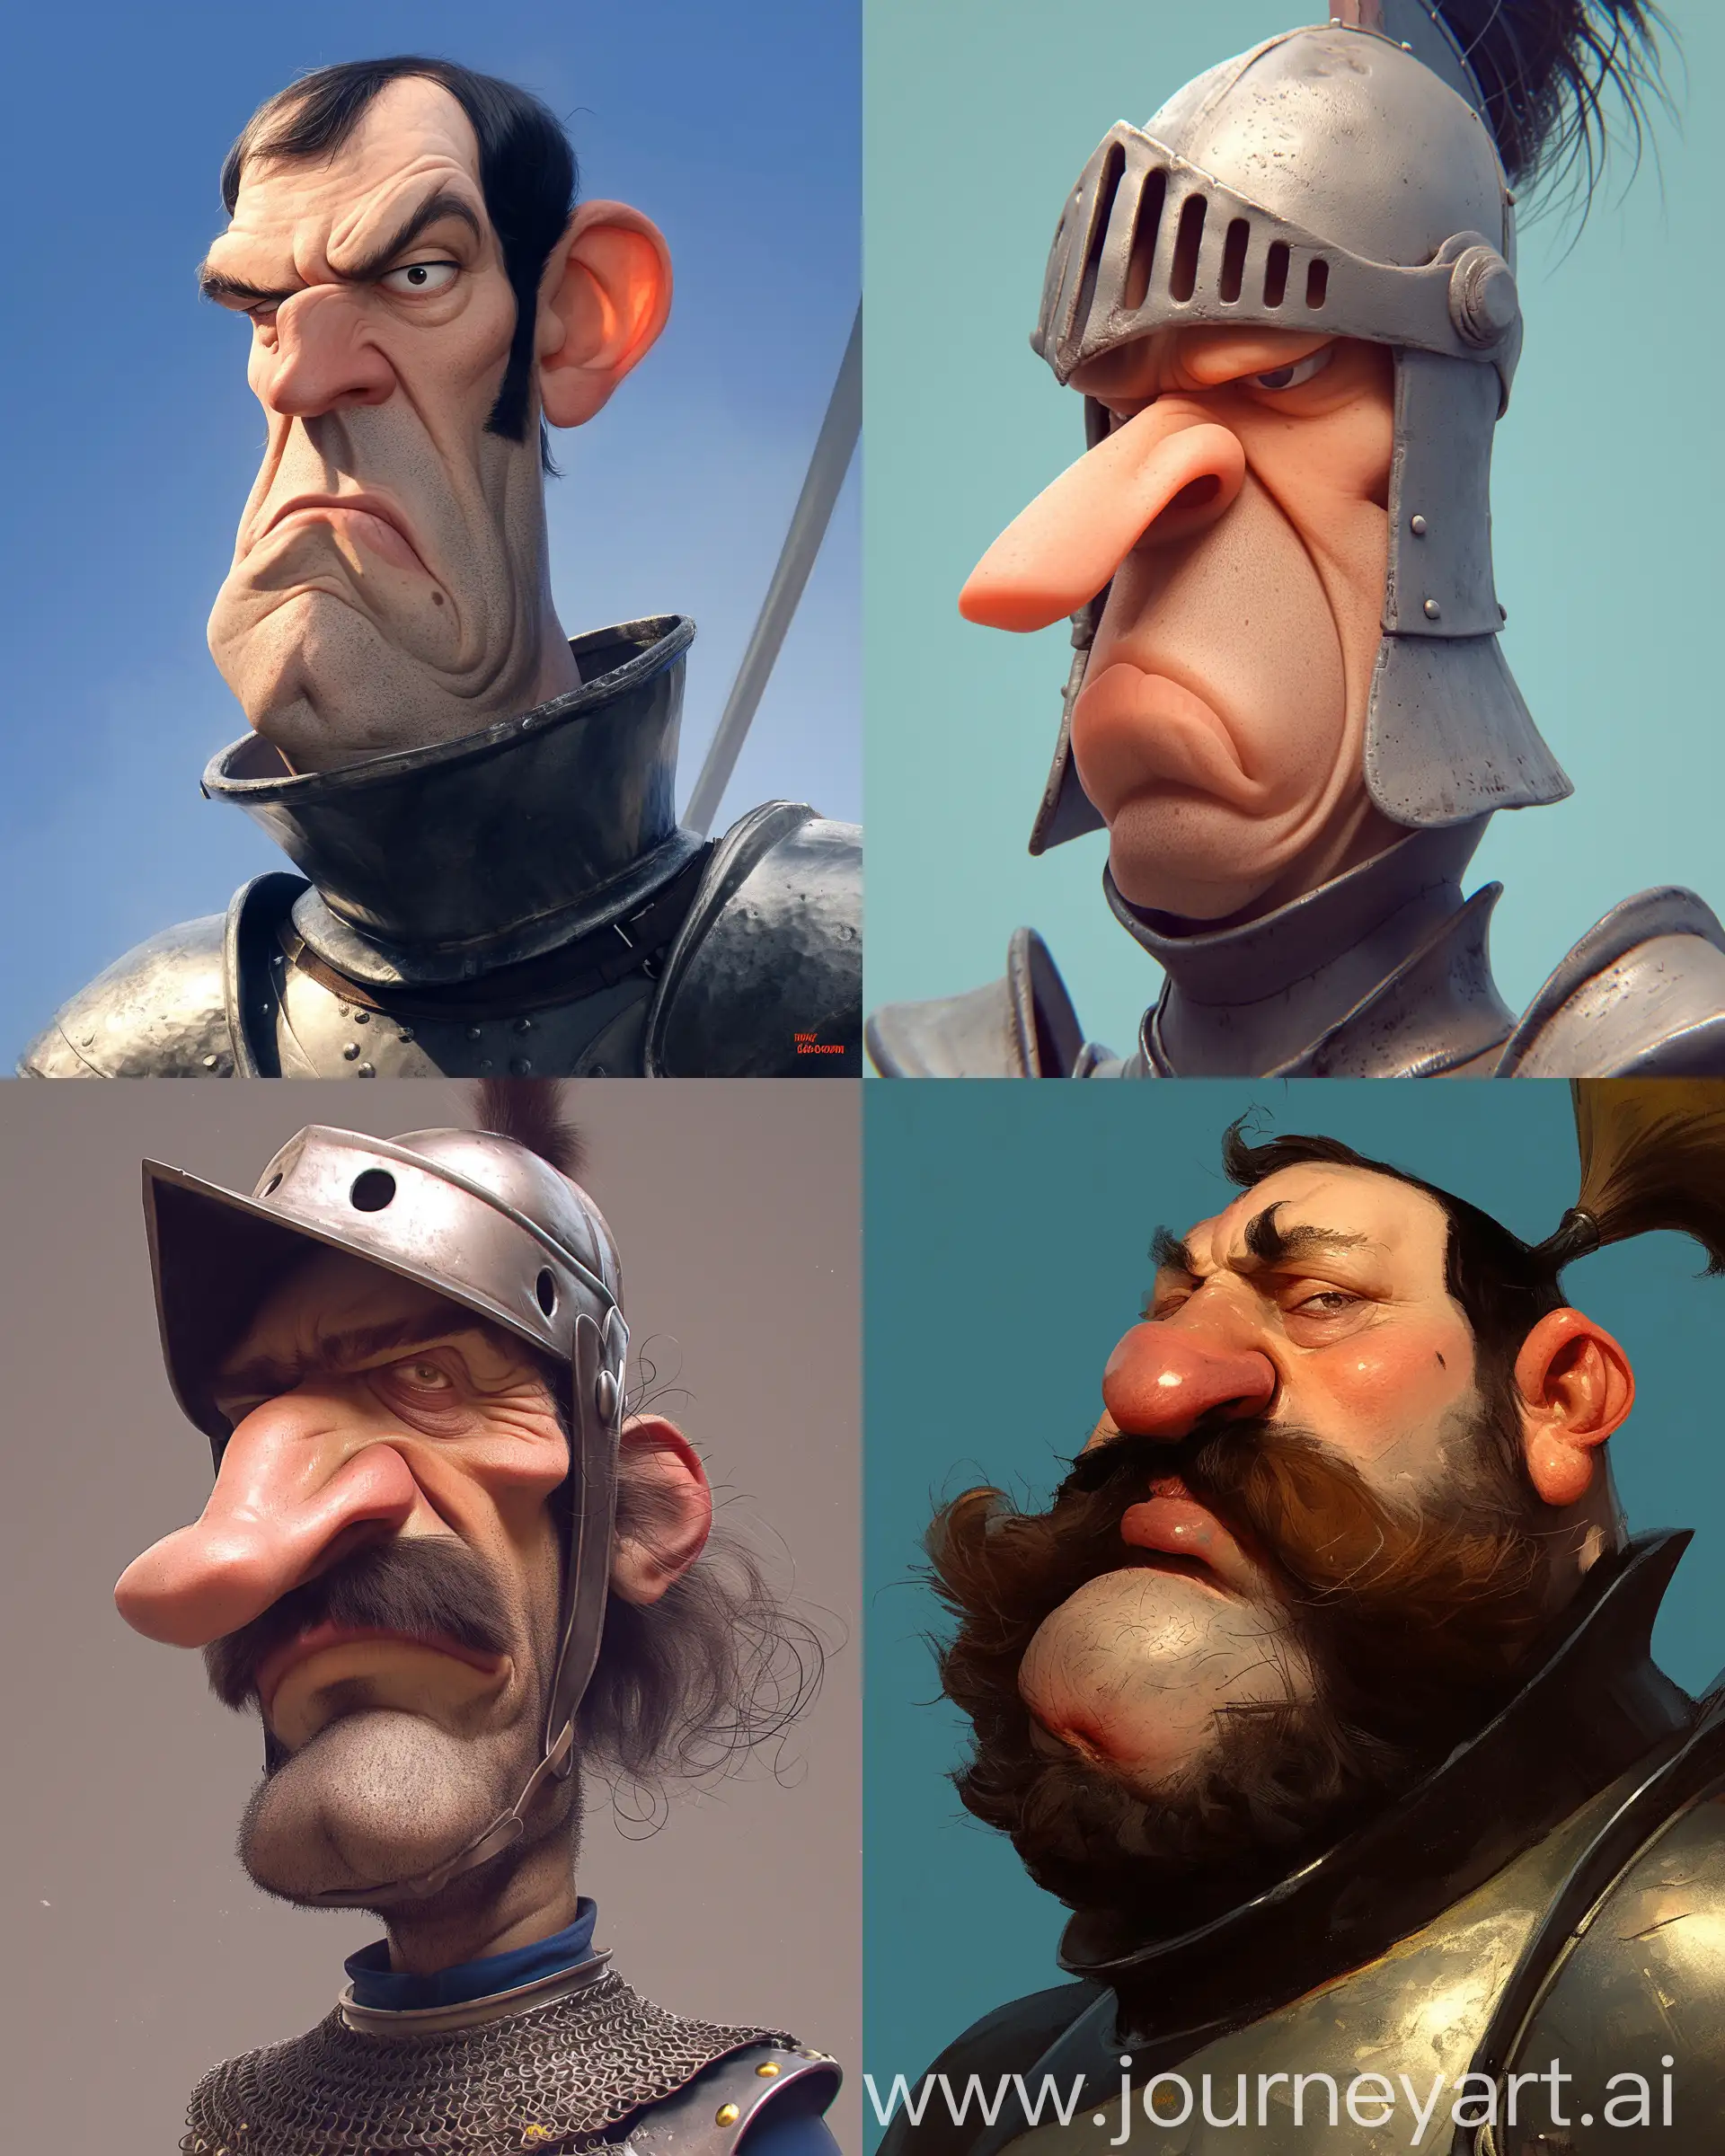 Humorous-CloseUp-Caricature-of-Monty-Python-Knight-Character-with-Exaggerated-Features-and-Realistic-Textures